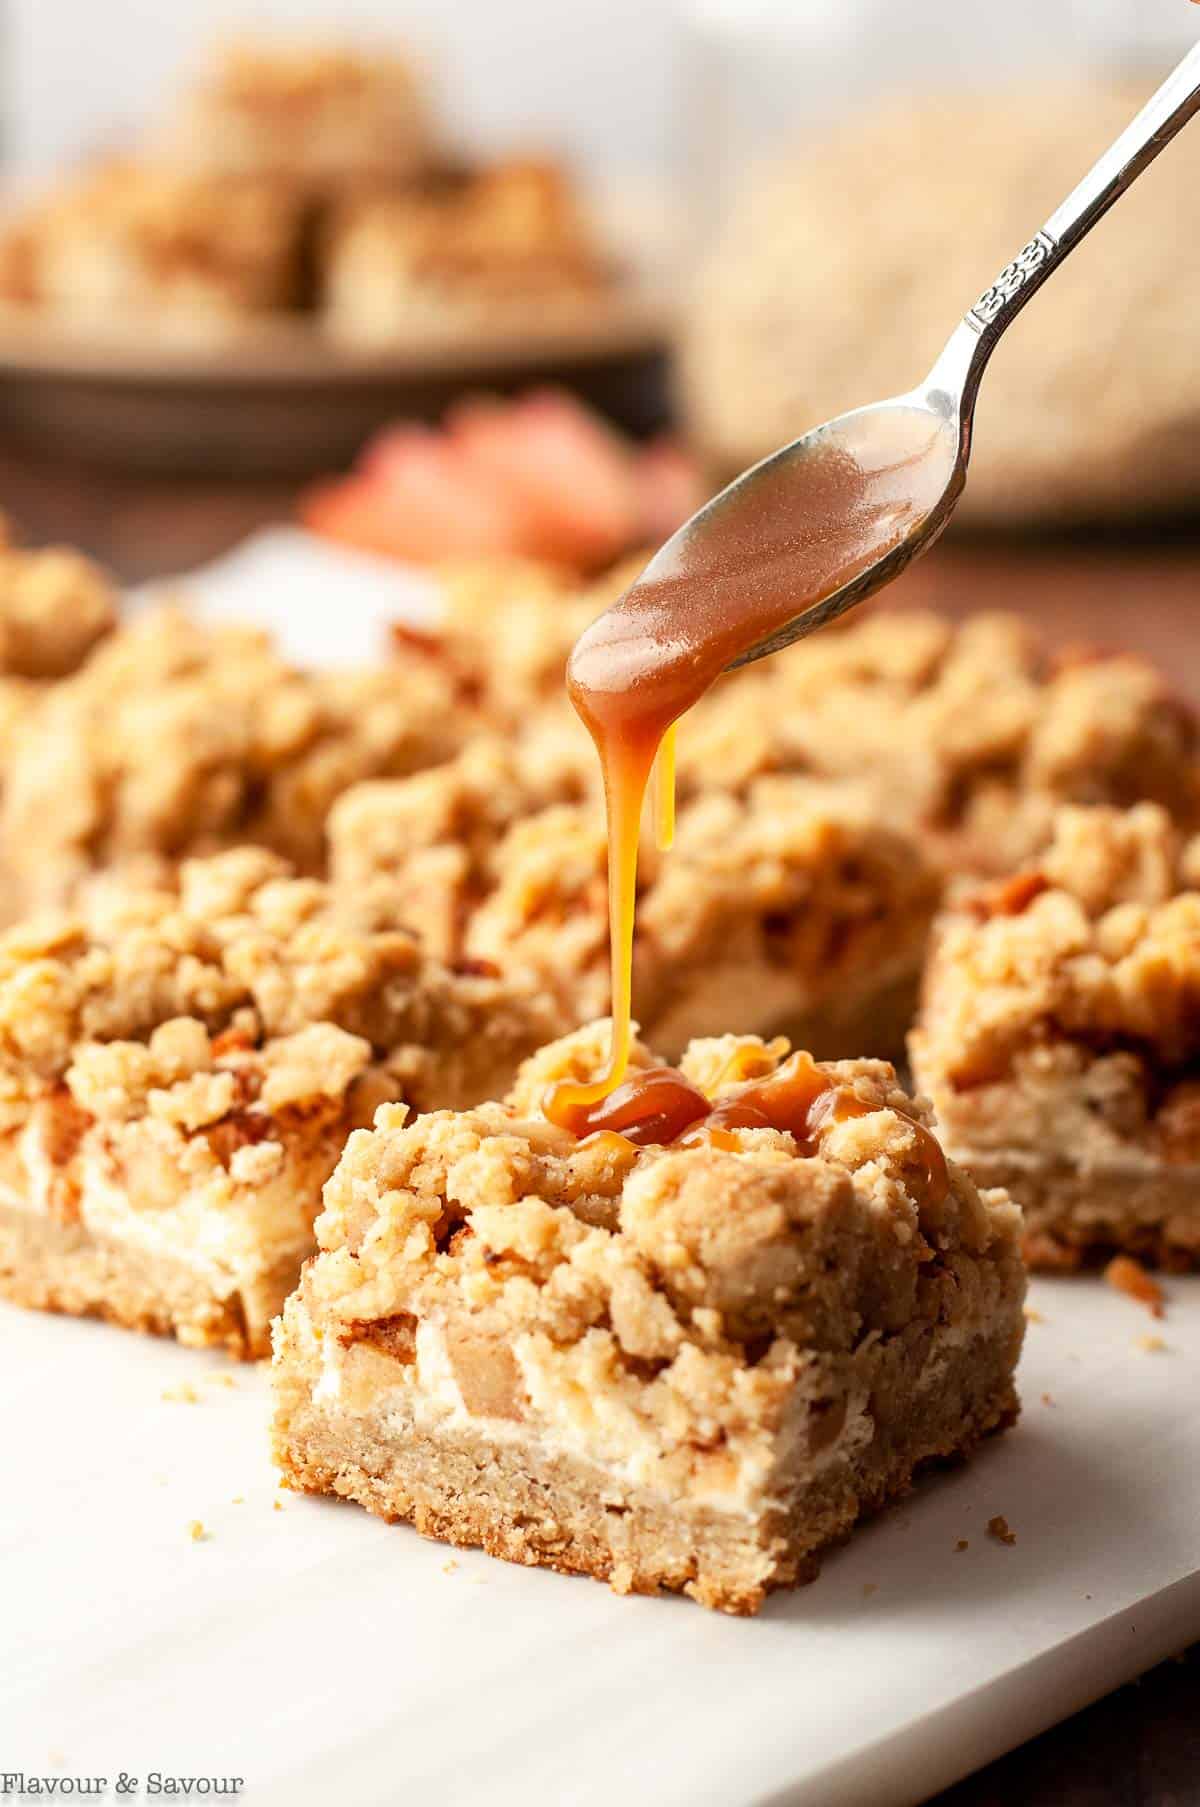 Drizzling caramel sauce from a spoon on Gluten-free Apple Cheesecake Crumble Bars.